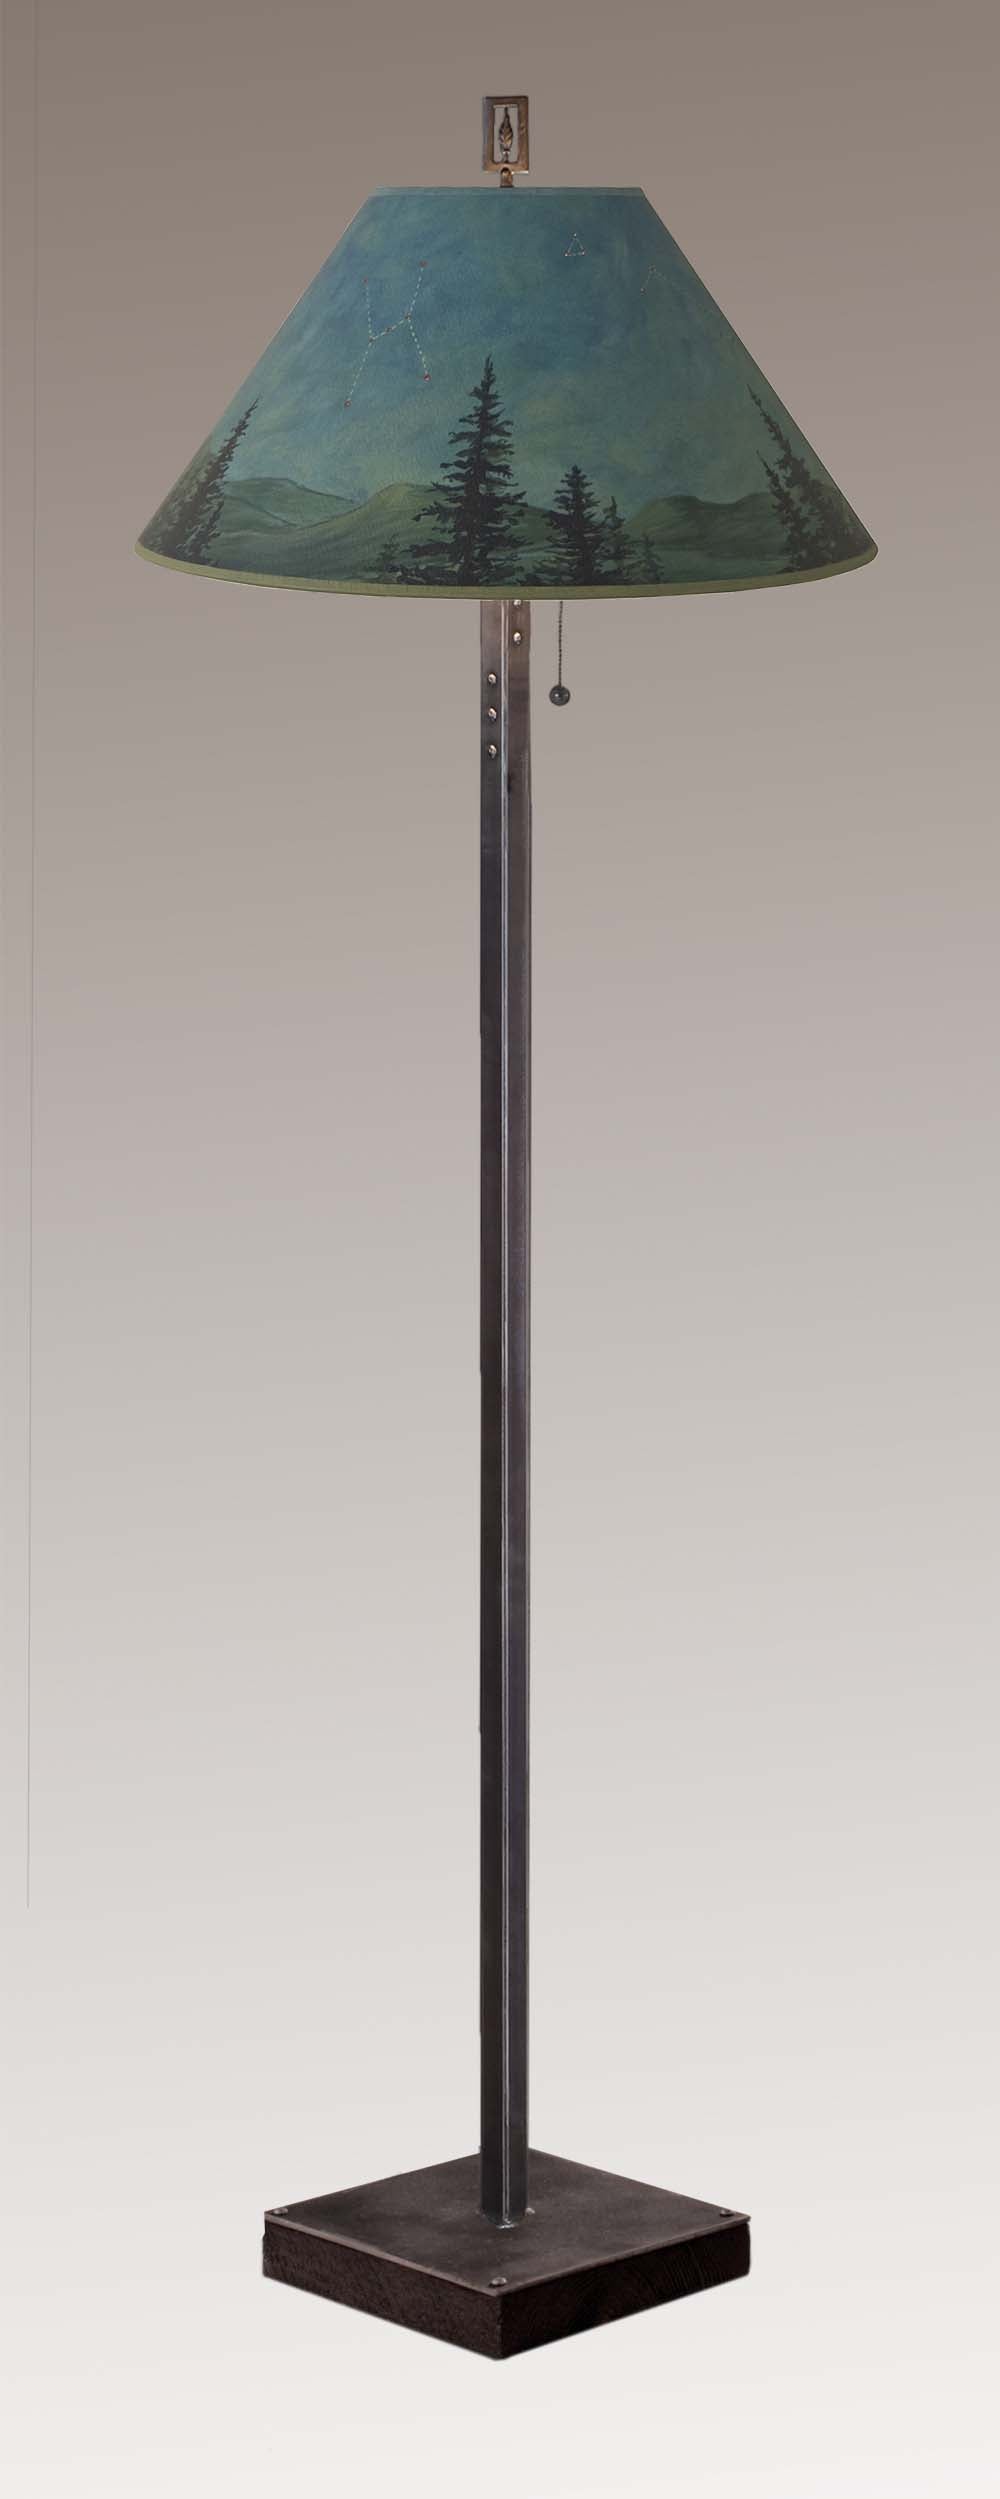 Janna Ugone & Co Floor Lamps Steel Floor Lamp on  Reclaimed Wood with Large Conical Shade in Midnight Sky